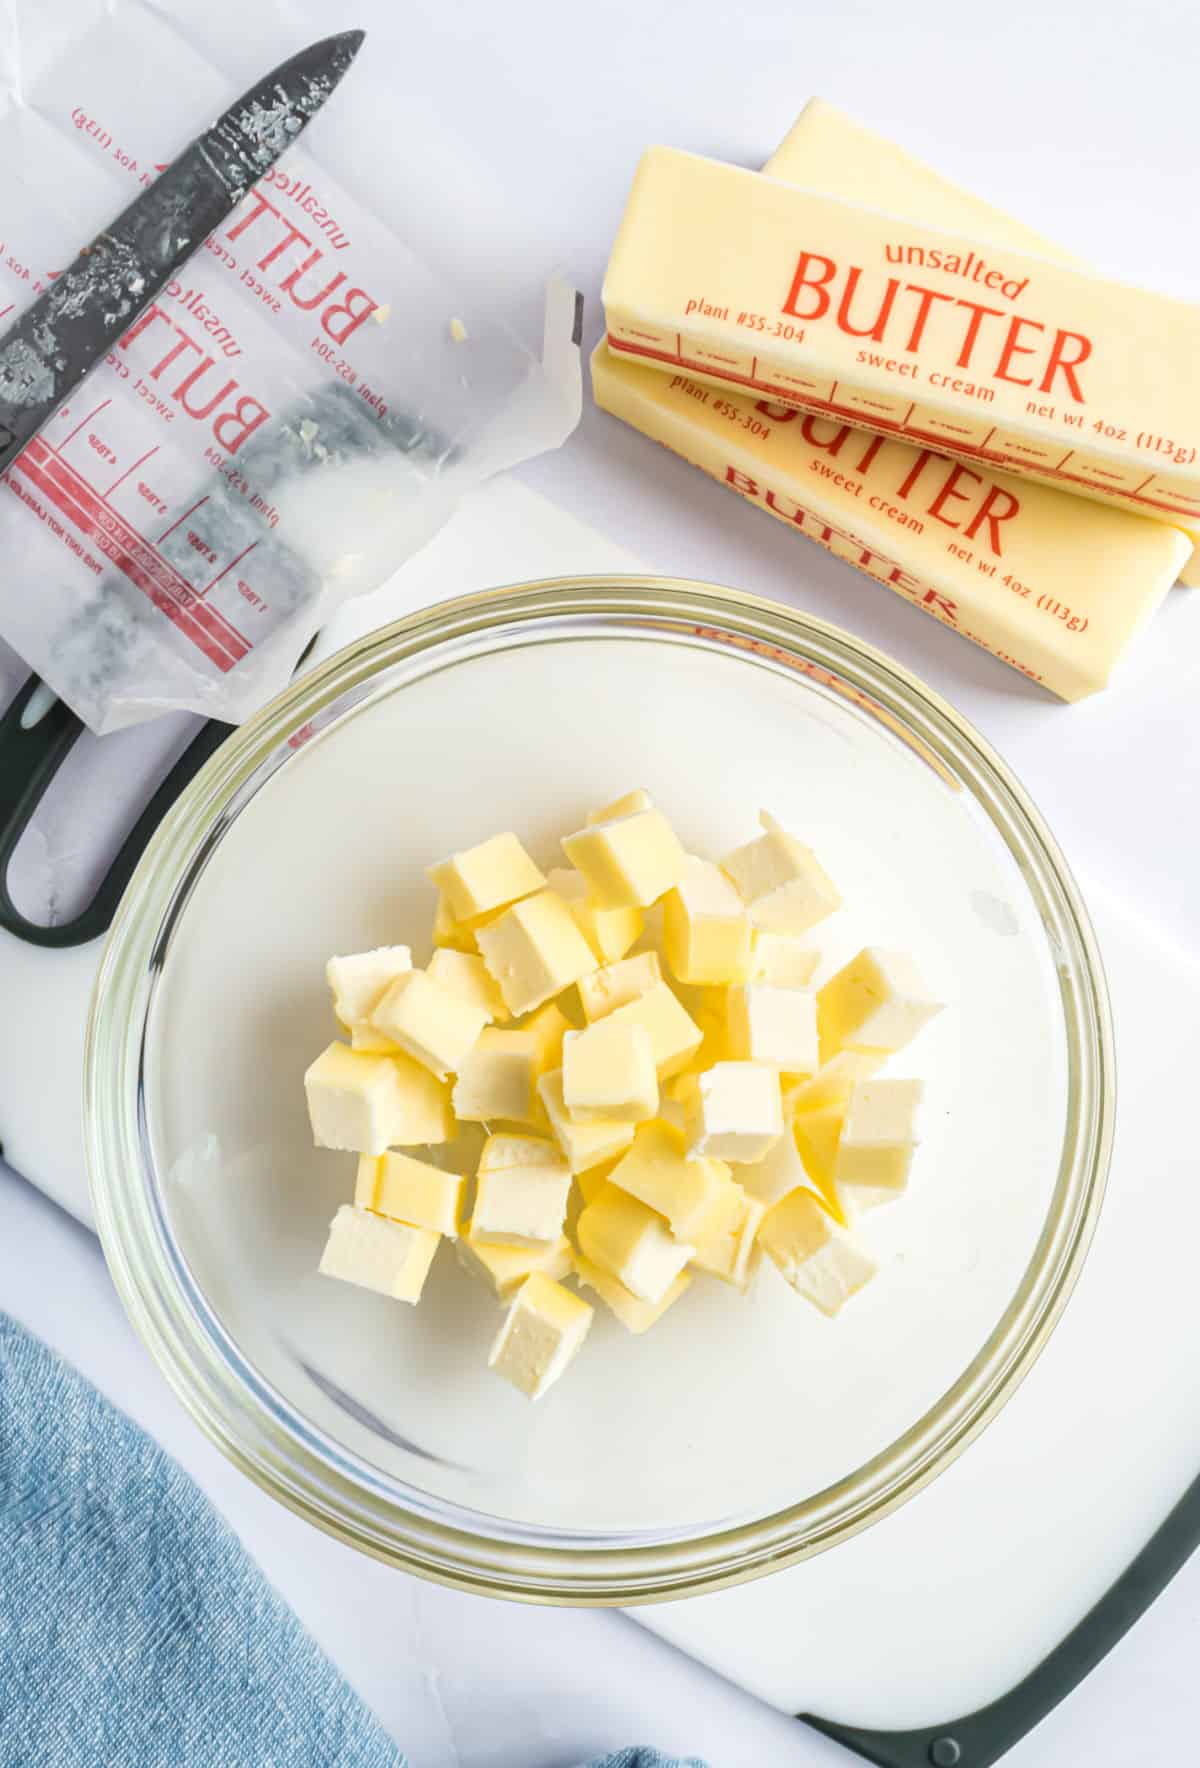 Butter cut into small cubes to soften in a glass bowl.